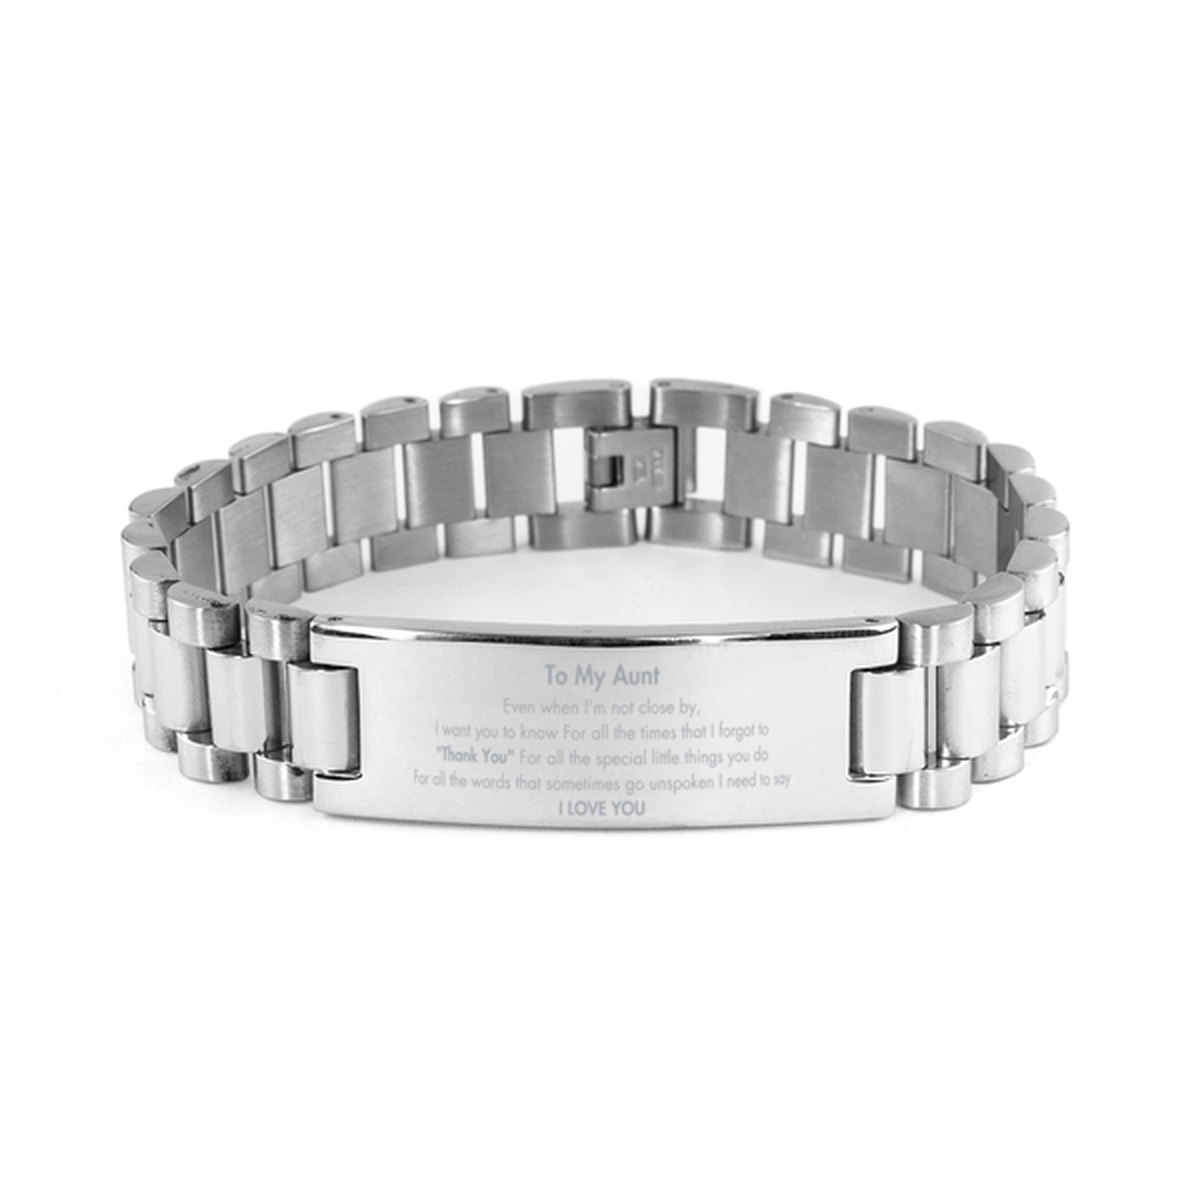 Thank You Gifts for Aunt, Keepsake Ladder Stainless Steel Bracelet Gifts for Aunt Birthday Mother's day Father's Day Aunt For all the words That sometimes go unspoken I need to say I LOVE YOU